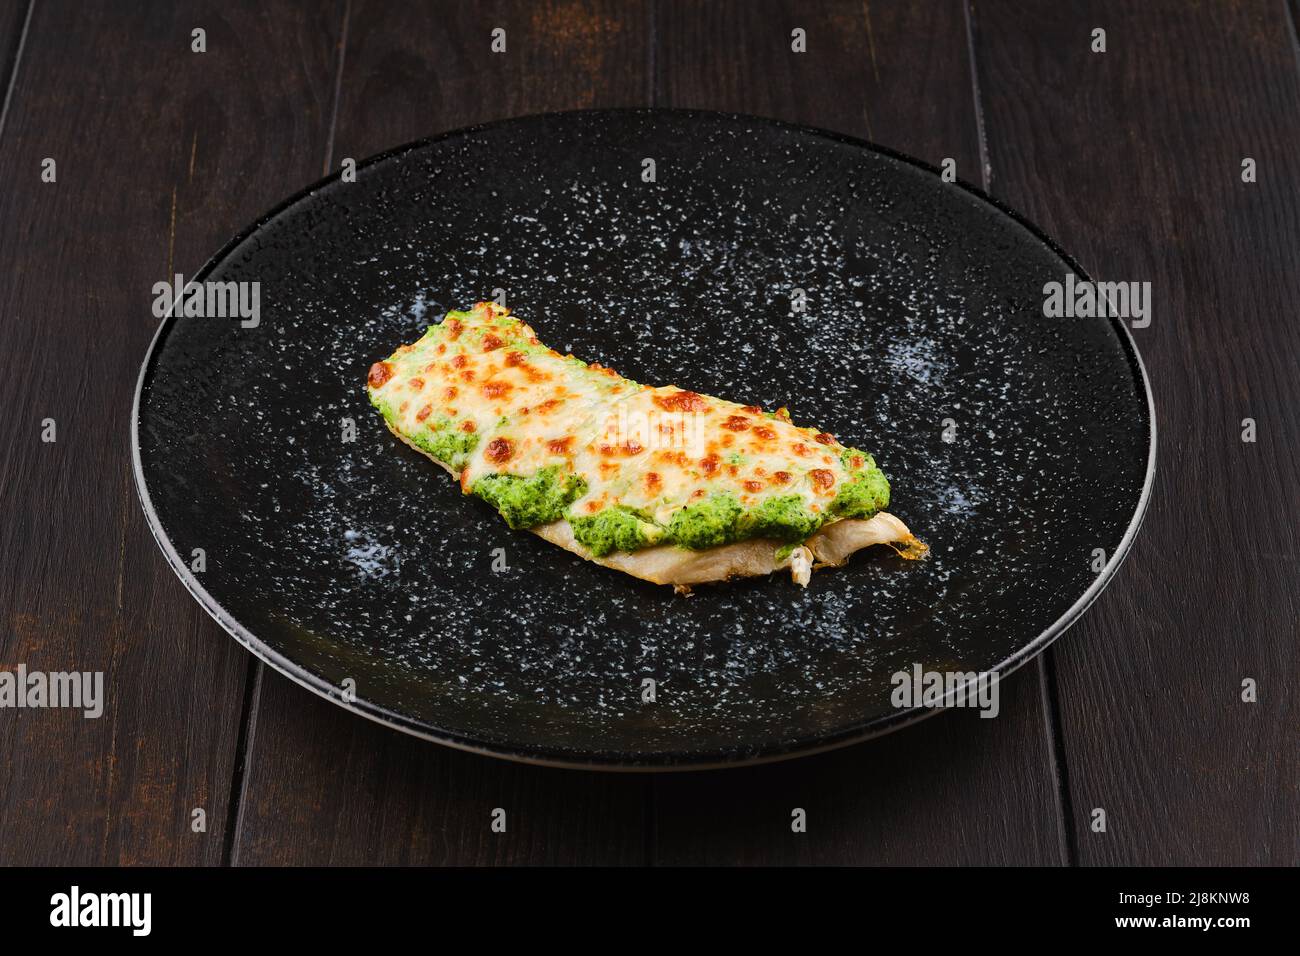 Fried fish fillet with green salsa sauce on a plate Stock Photo